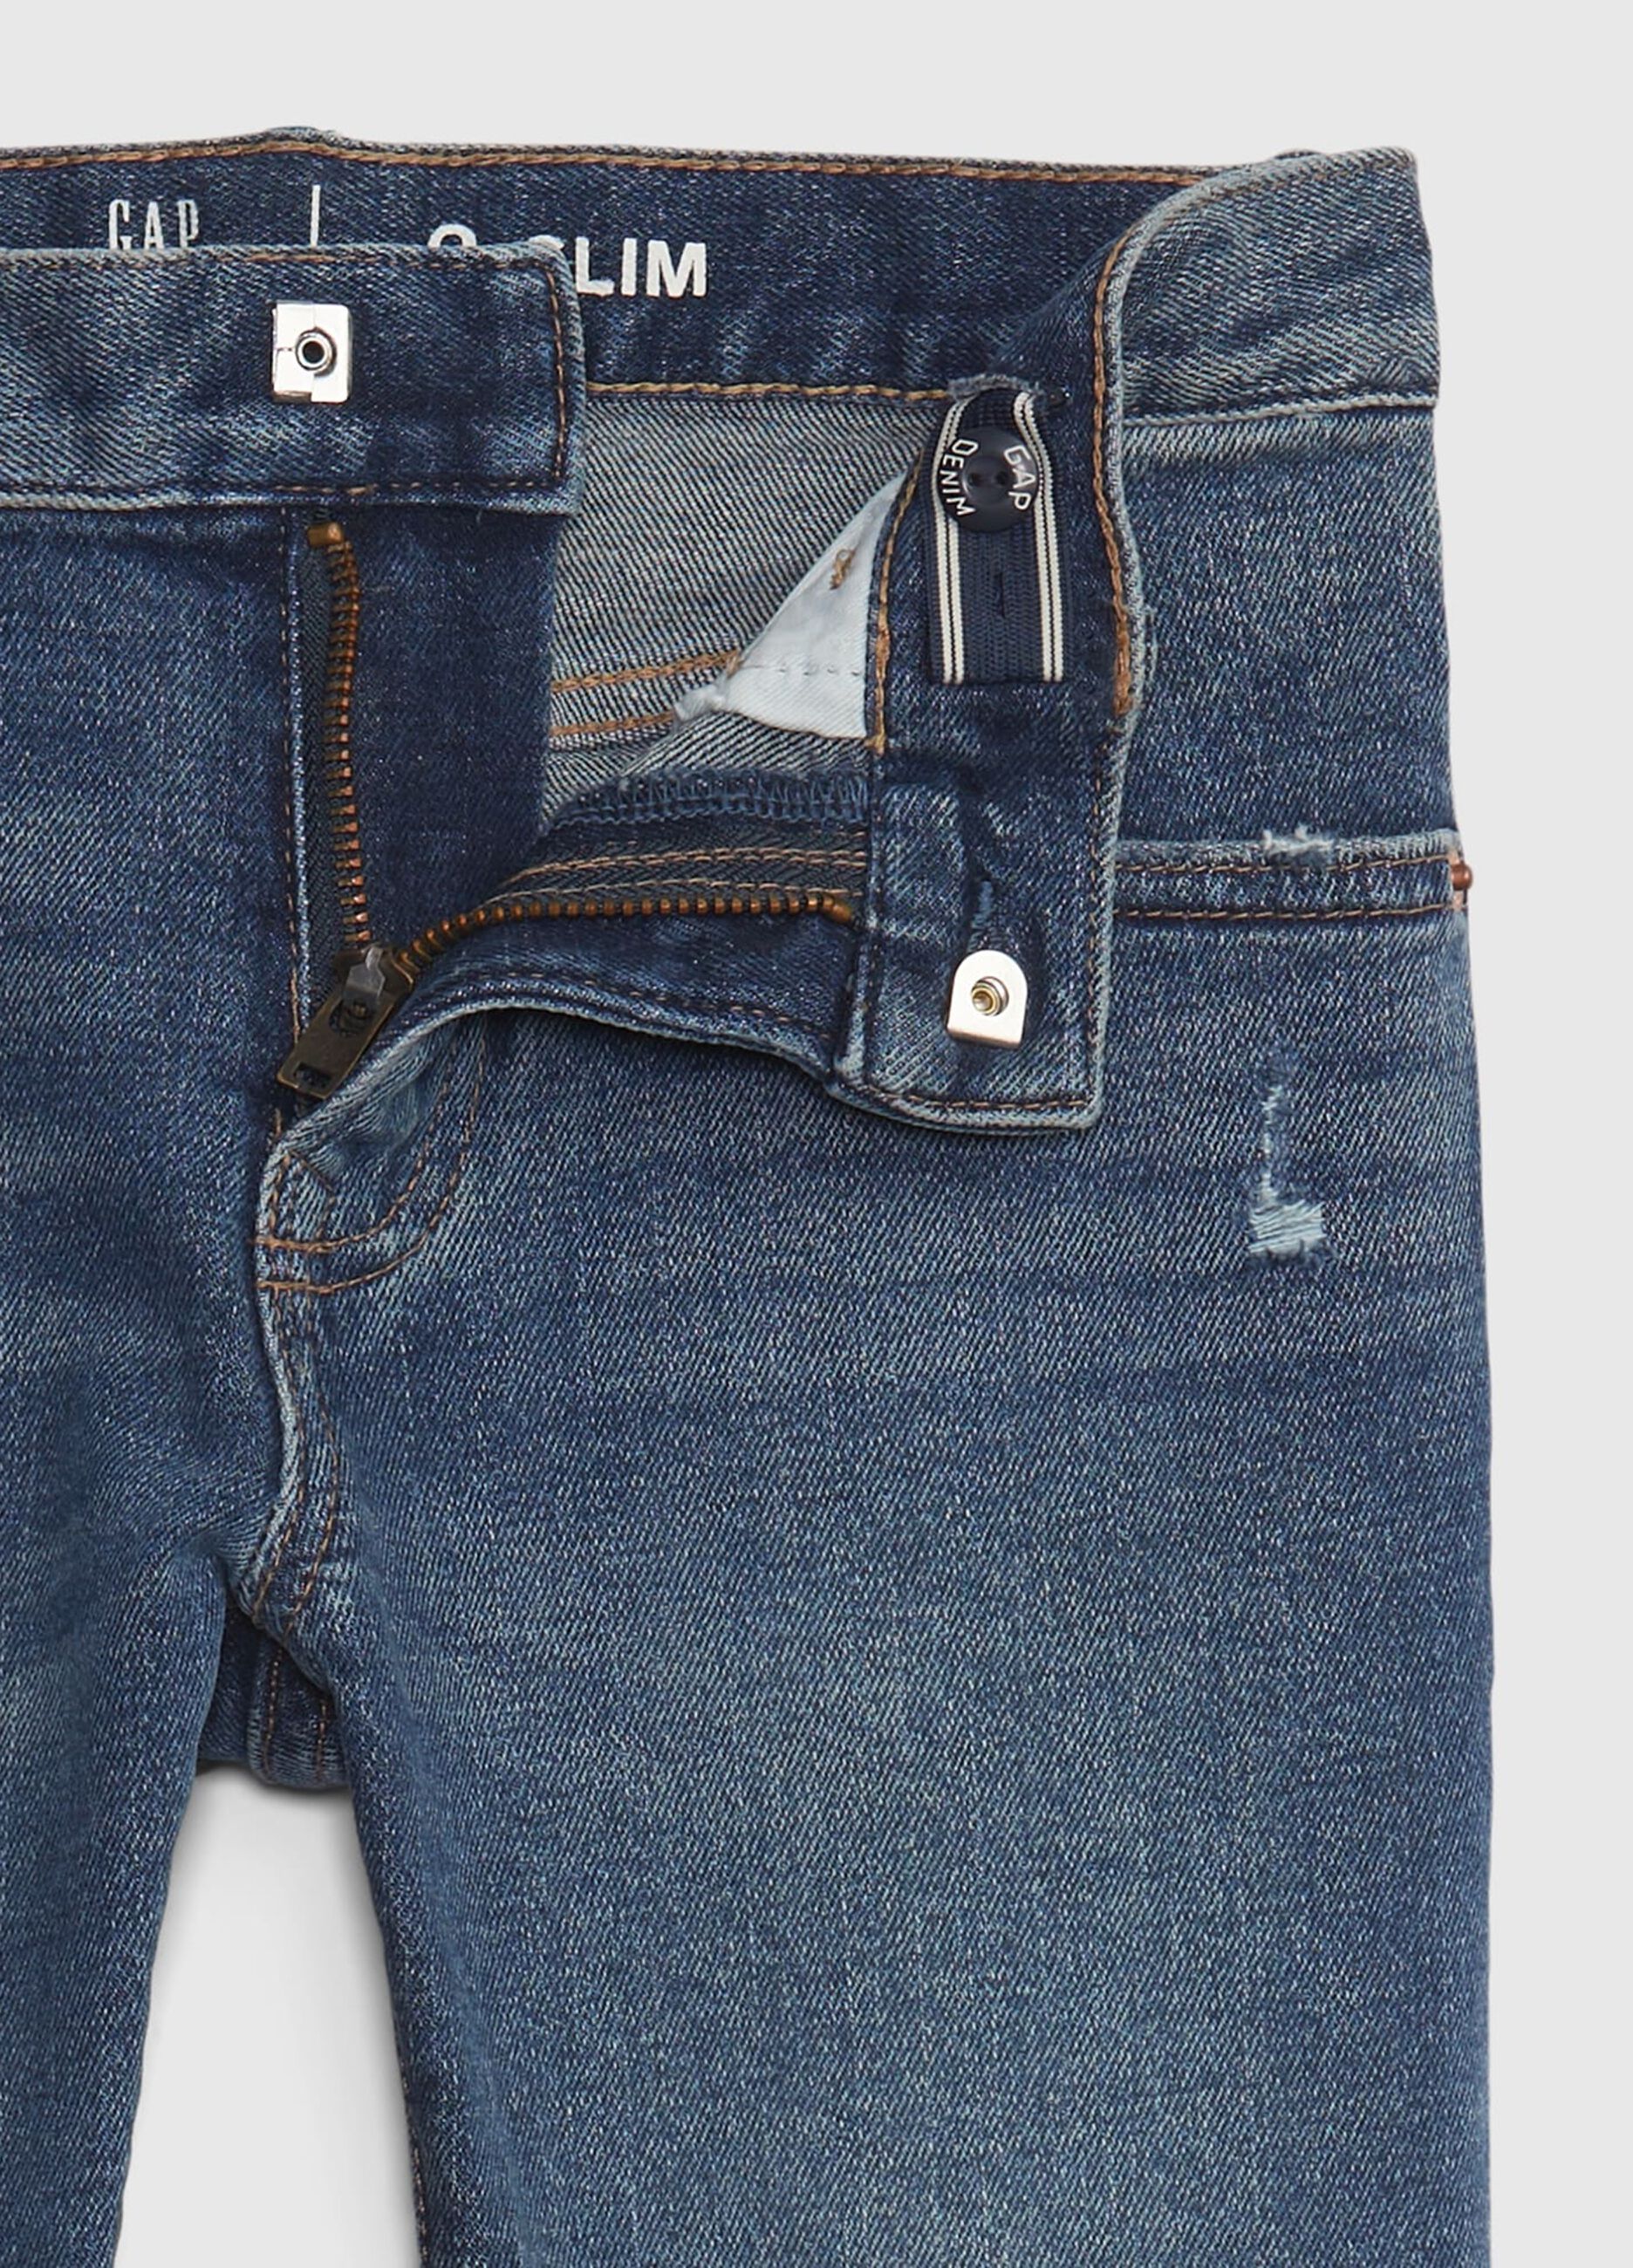 Slim-fit jeans with rips and fading